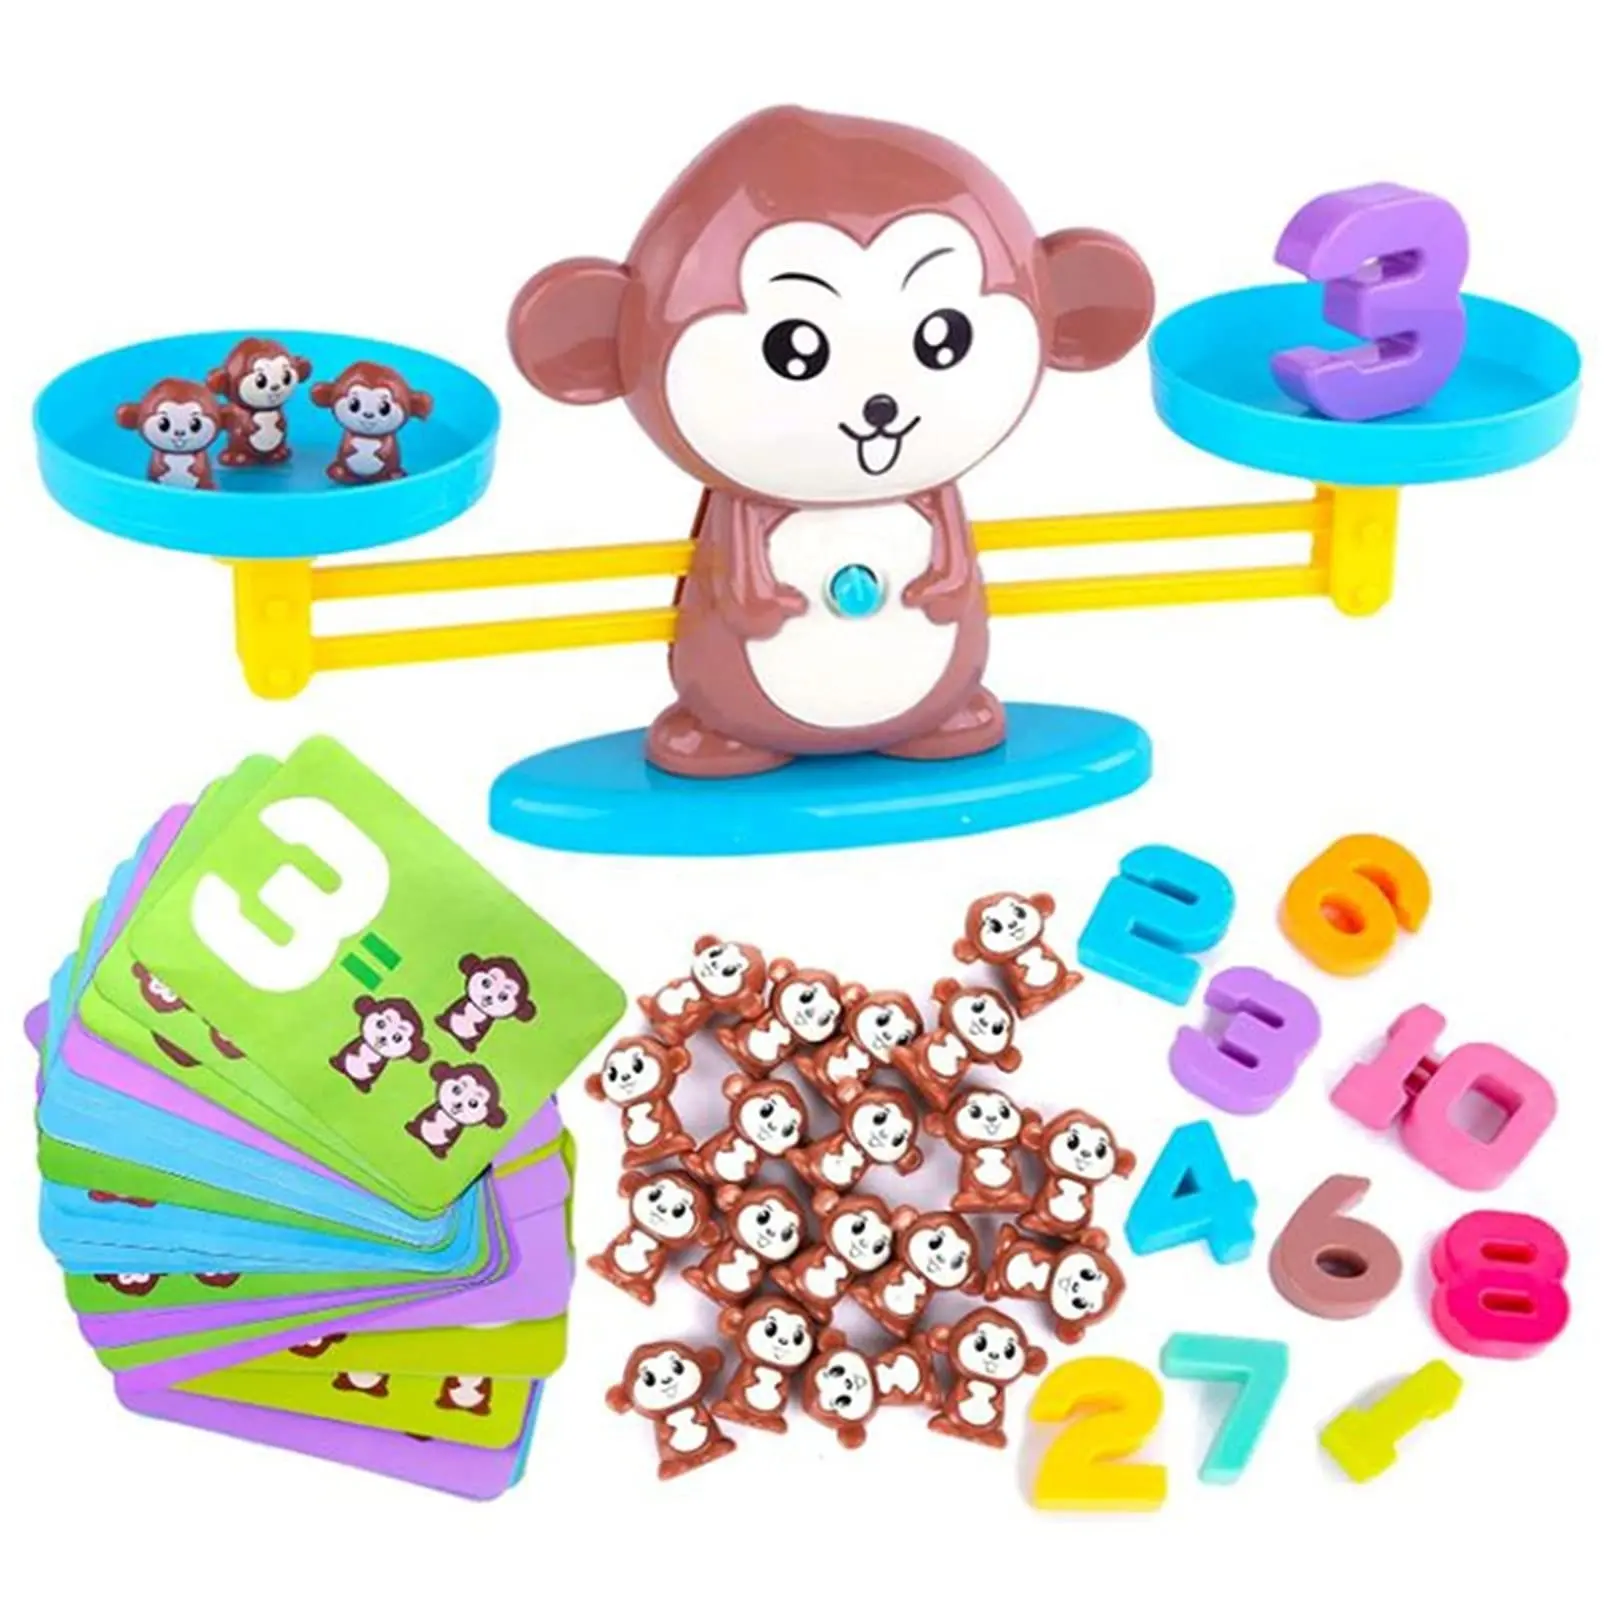 Monkey Balance Counting Cool Math Games ,Weighing Scale Montessori Educational Math Counting Games & Balance Measuring STEM Toy